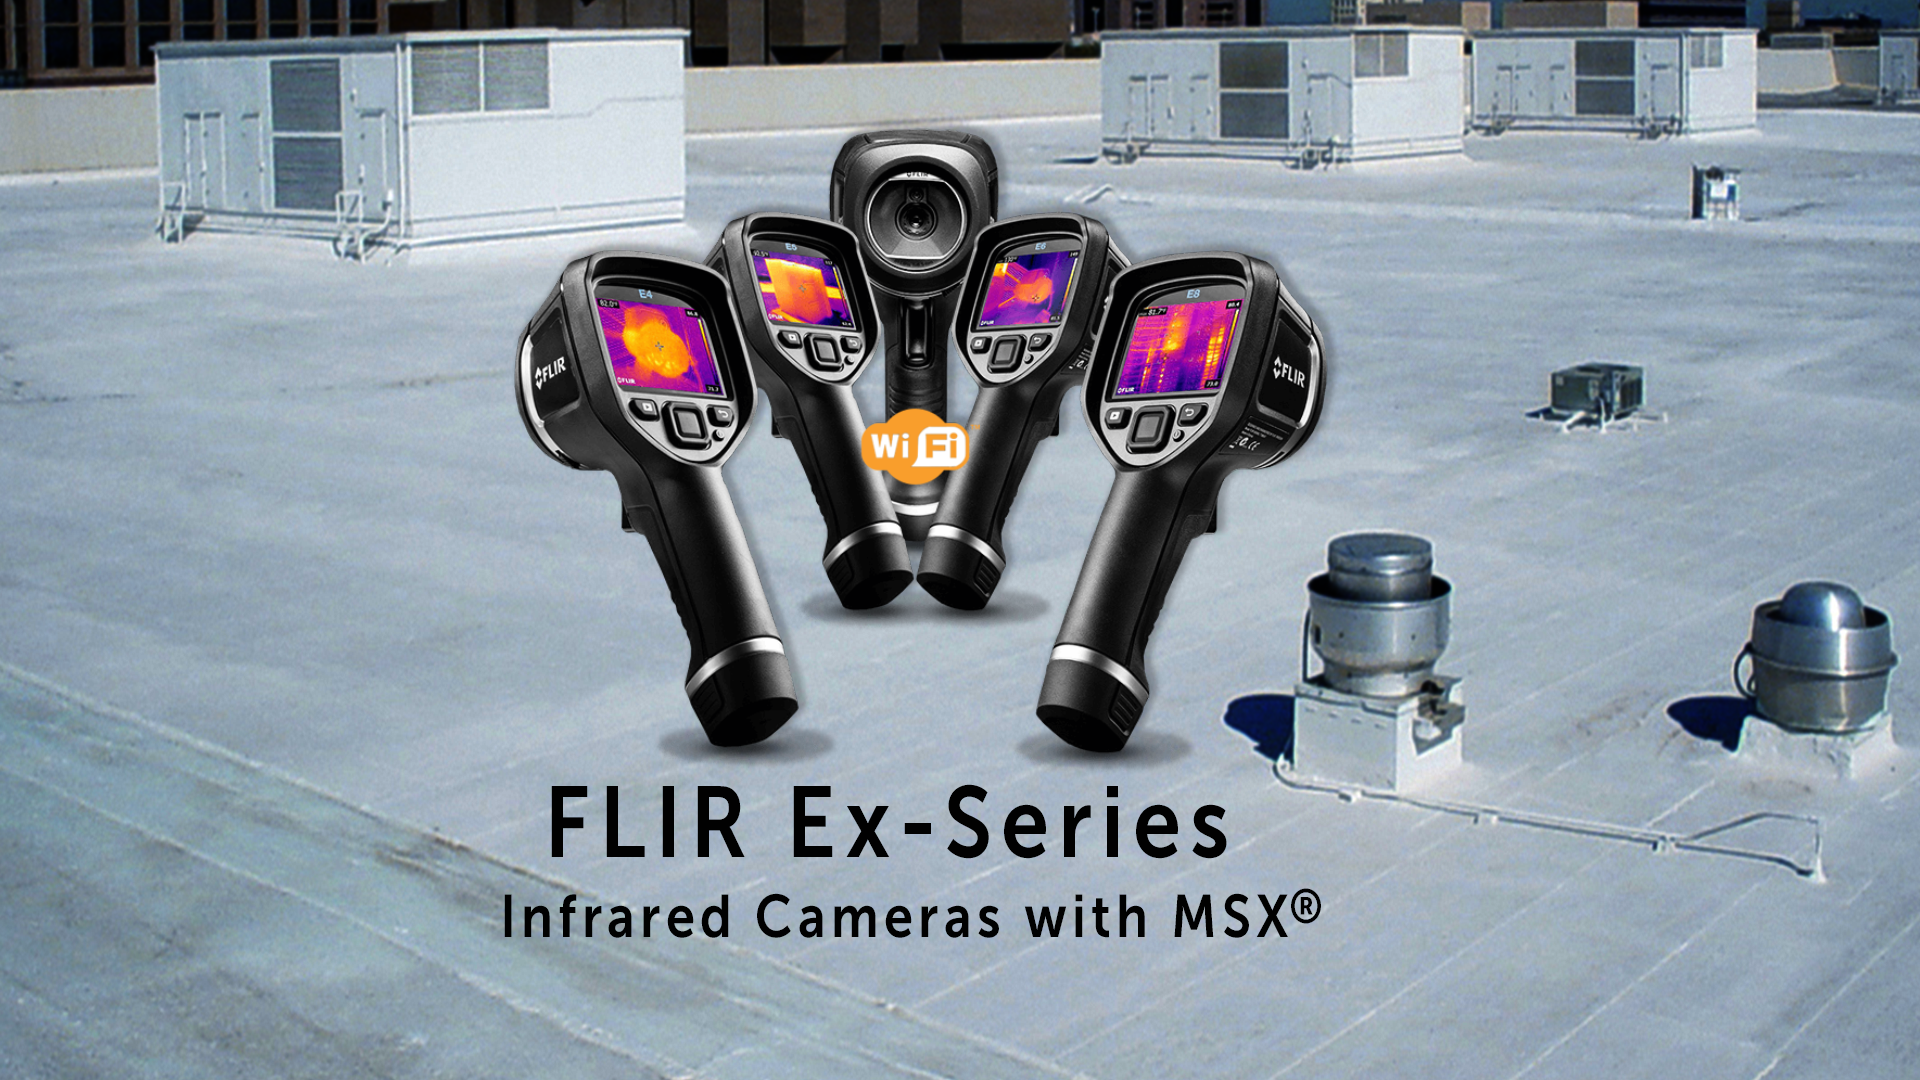 The FLIR Ex-Series Infrared Cameras with MSX